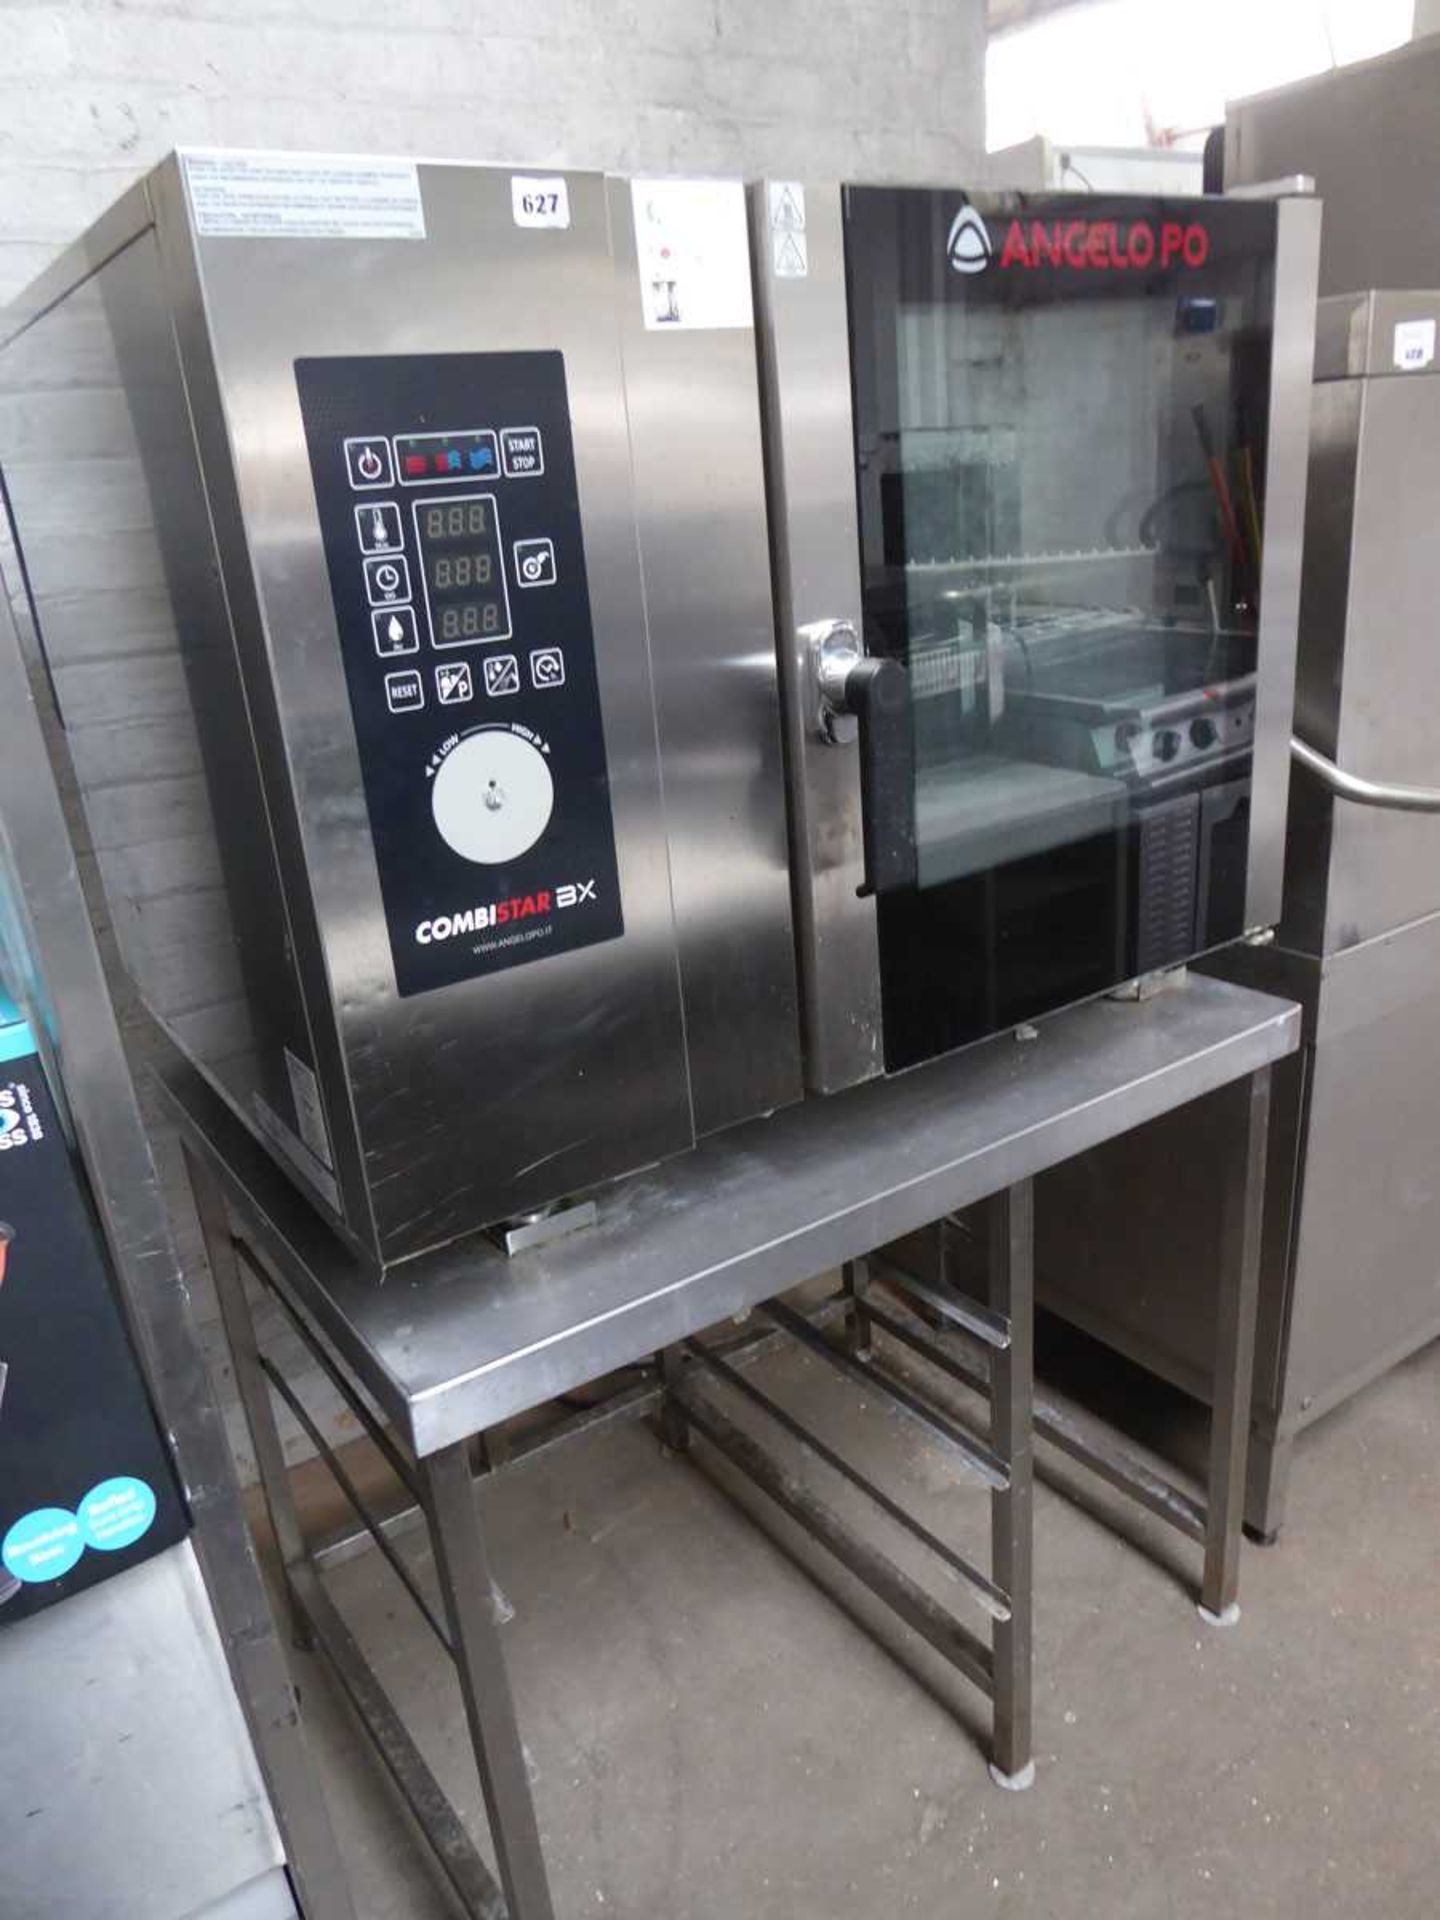 93cm electric Angelo Po combi star BX 6 grid combination oven on stand